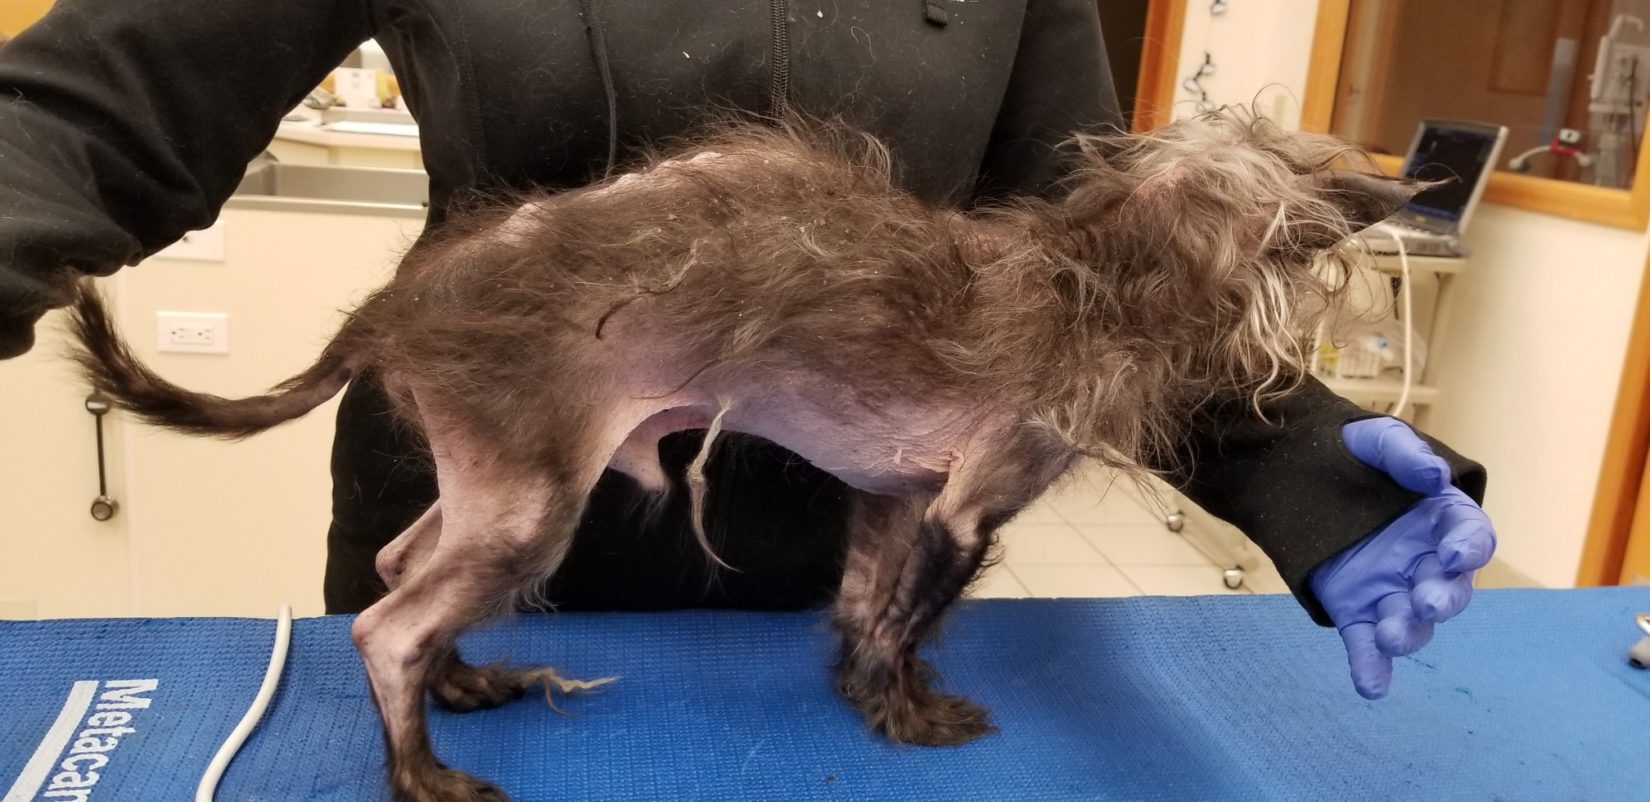 Hoss, a 17-year-old Chinese Crested, is examined by veterinarians.